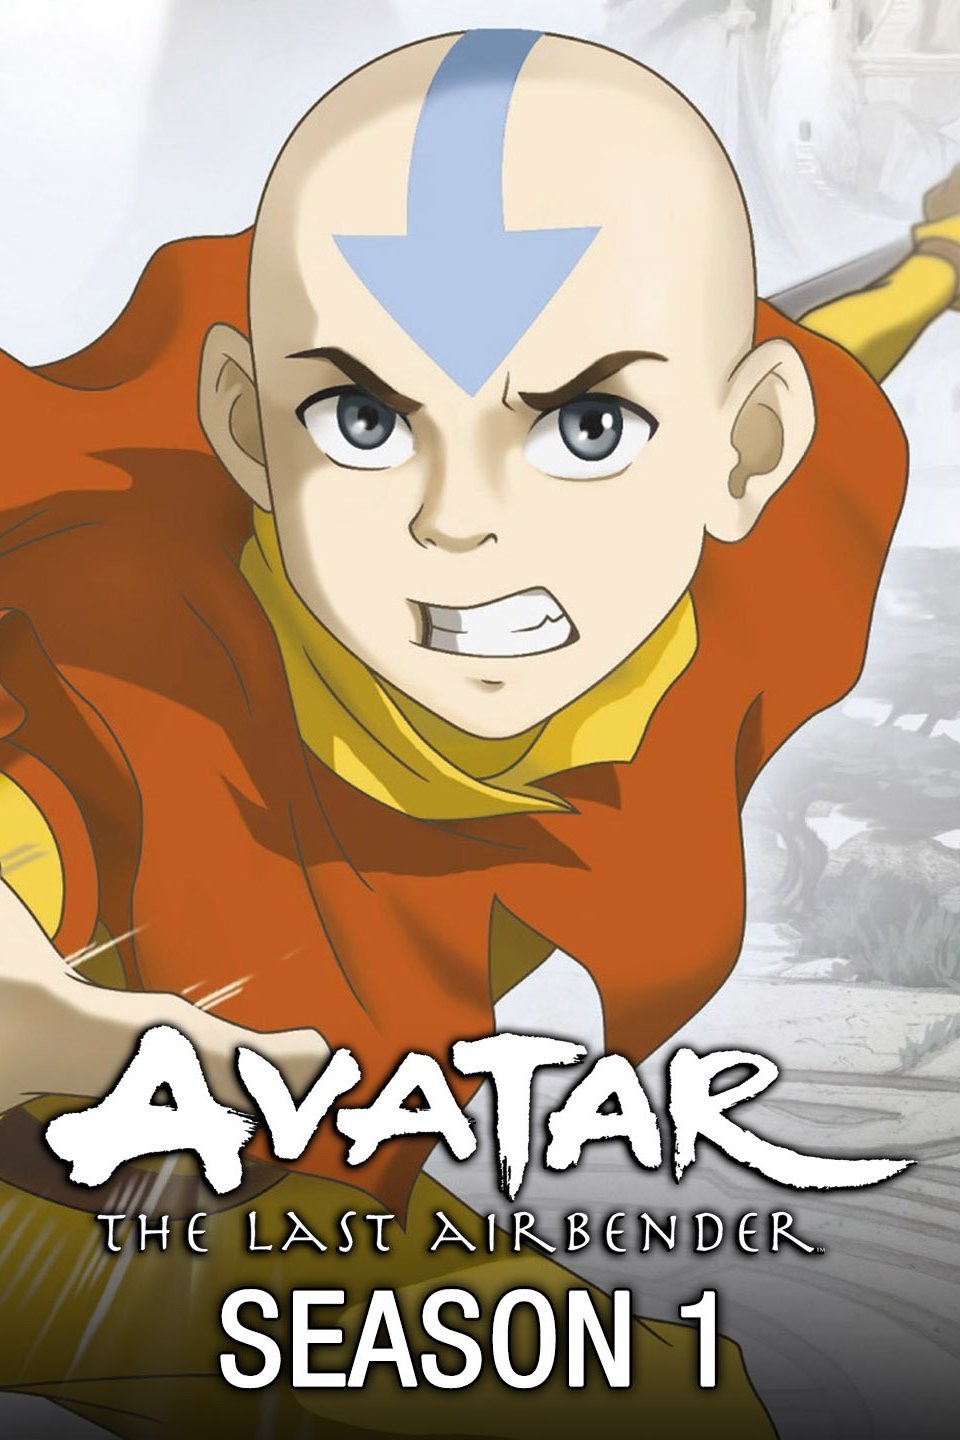 A timeline of ALL Avatar content comics novels animated series  oneshots you name it  rTheLastAirbender